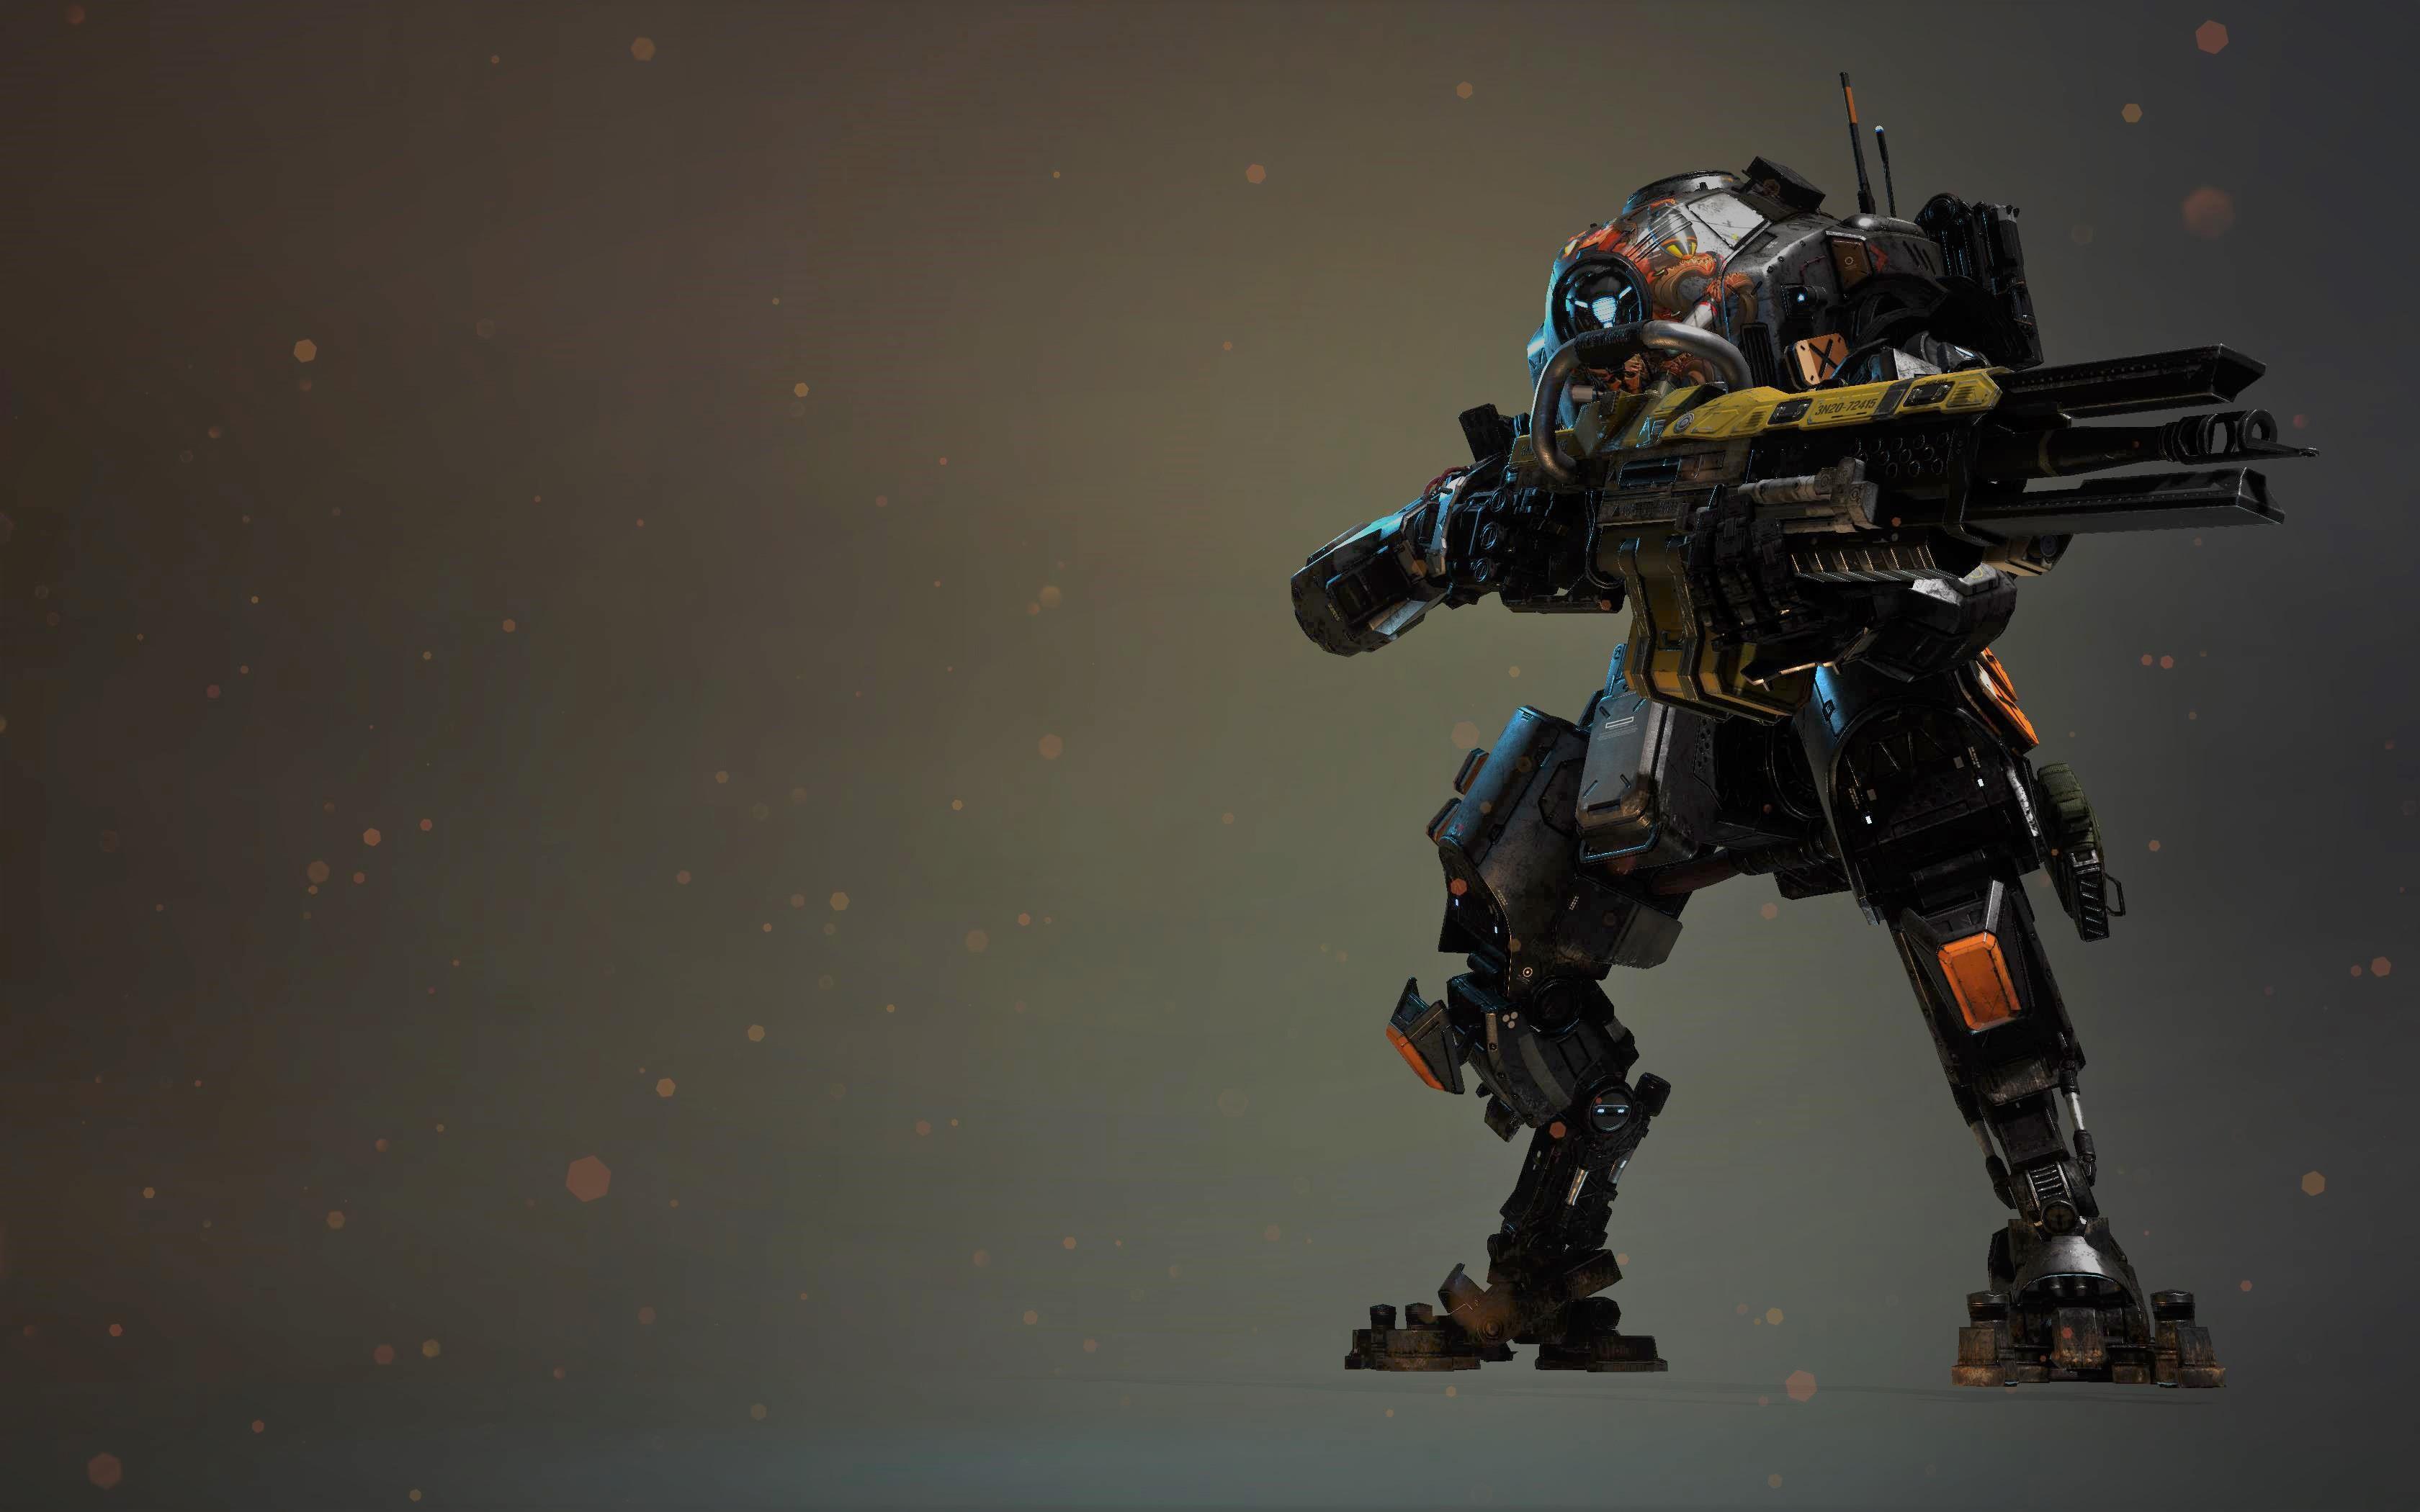 My New Wallpaper, Thought I'd Share - Titanfall 2 Tone Skins , HD Wallpaper & Backgrounds